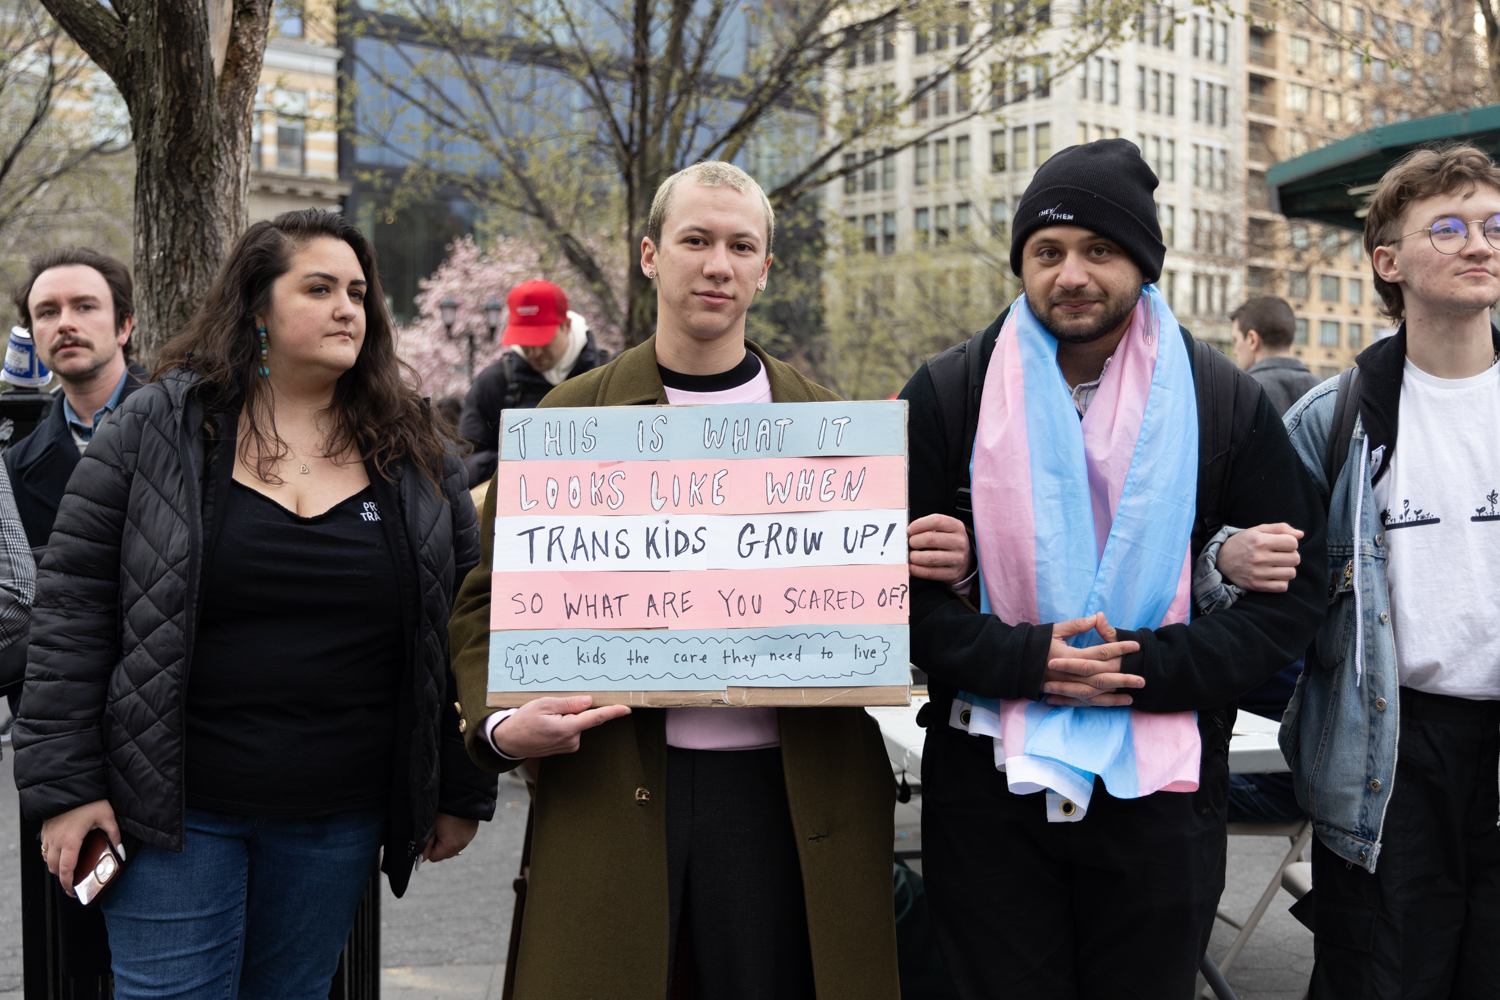 Trans+Day+of+Visibility+march+sees+hundreds+gather+for+trans+rights